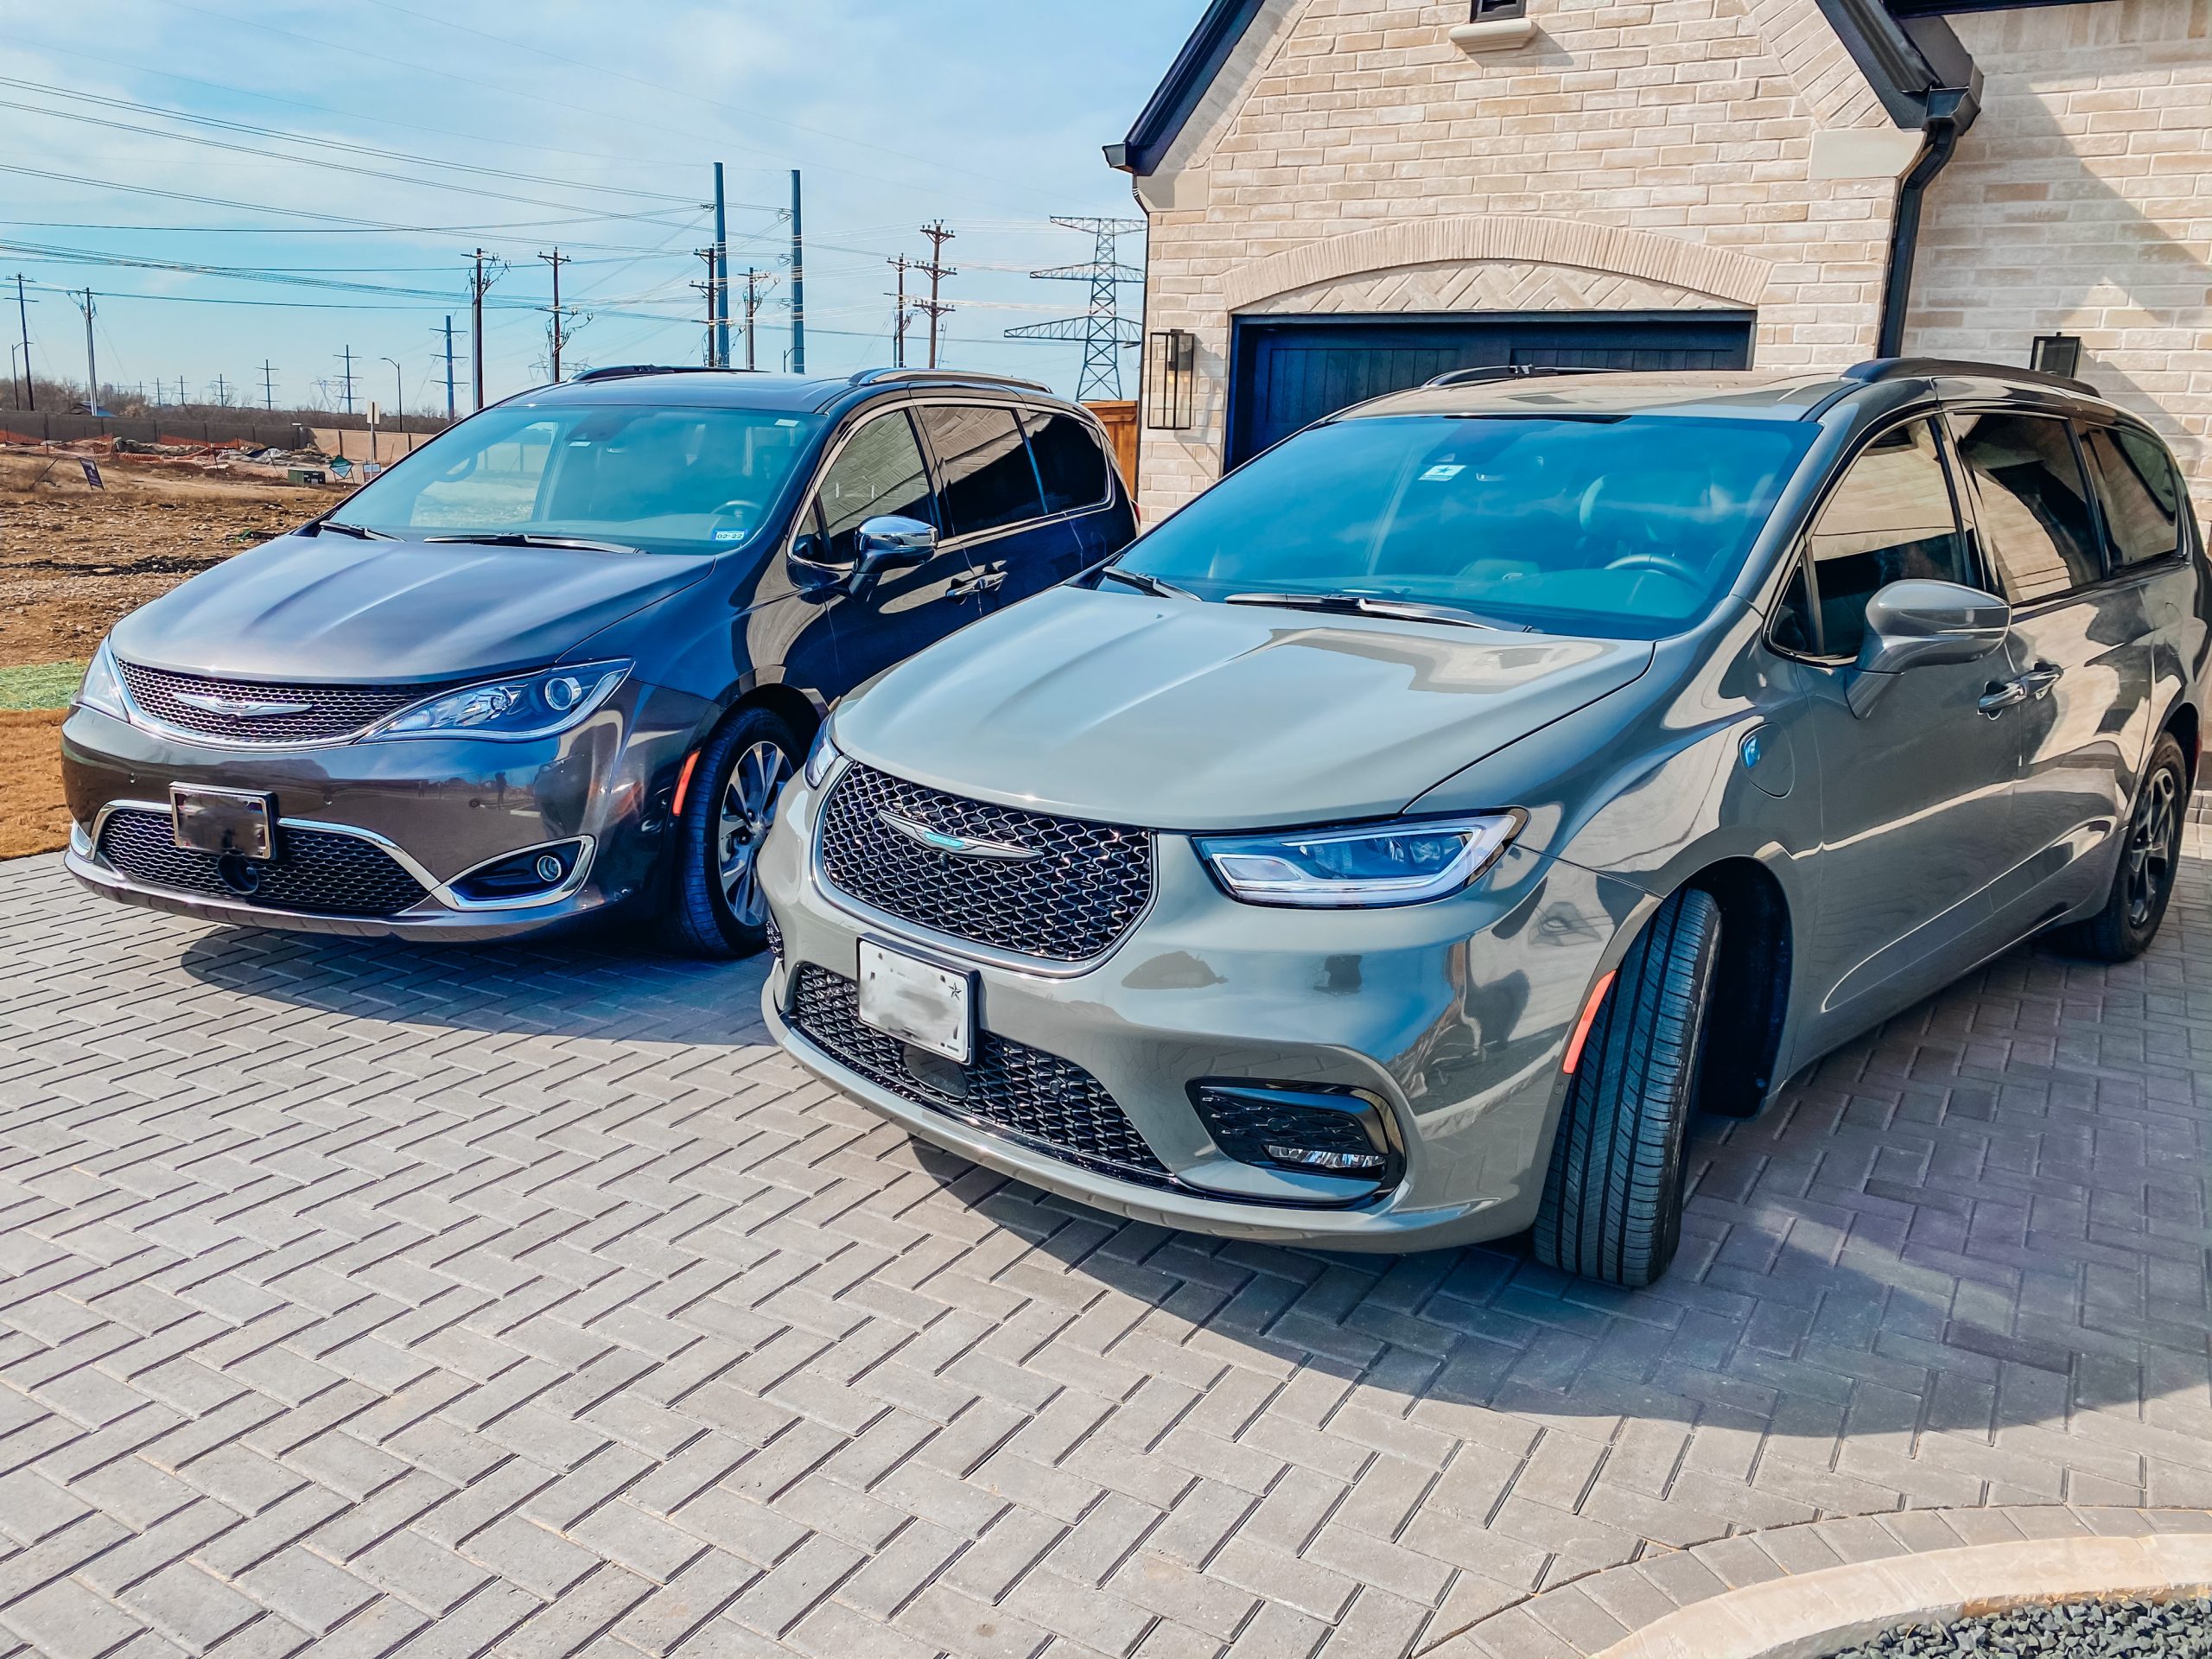 2020 and 2021 chrysler pacifica models in a driveway